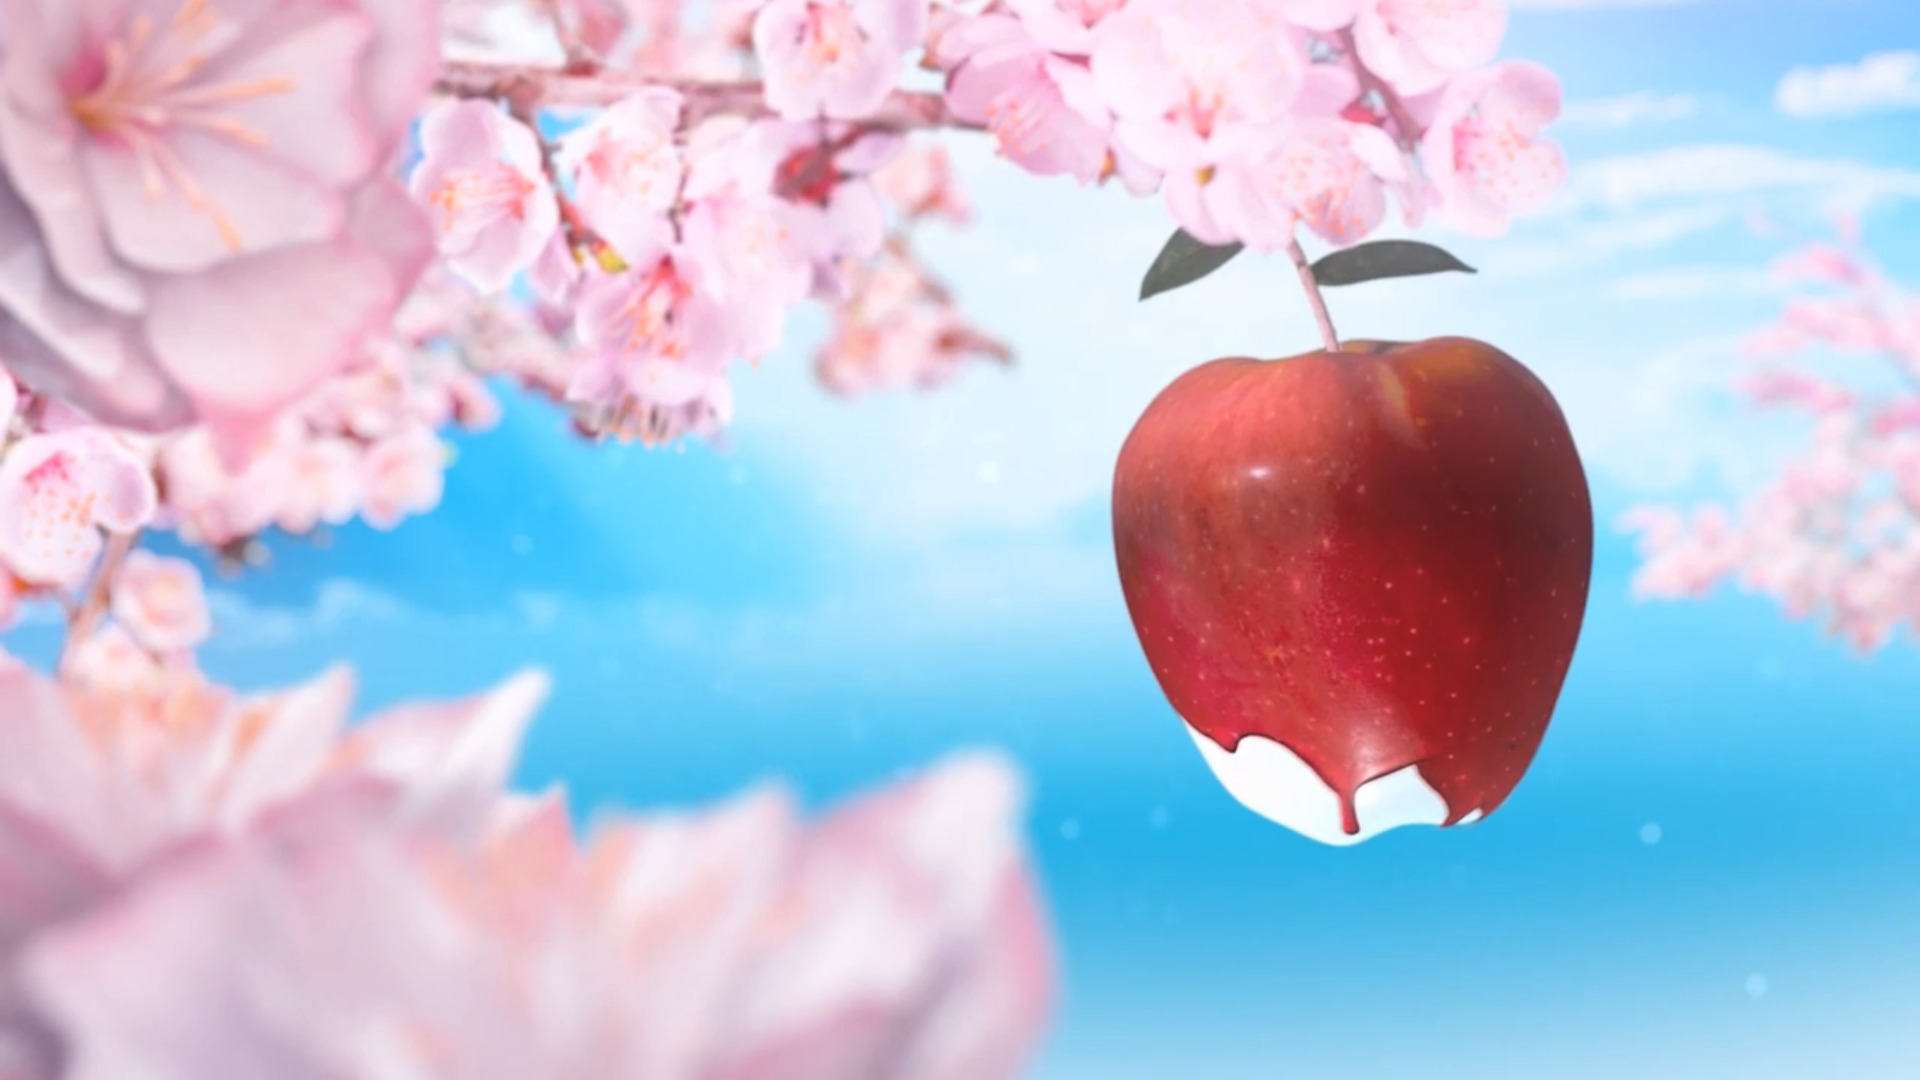 abstract, Apples, Flowers Wallpaper